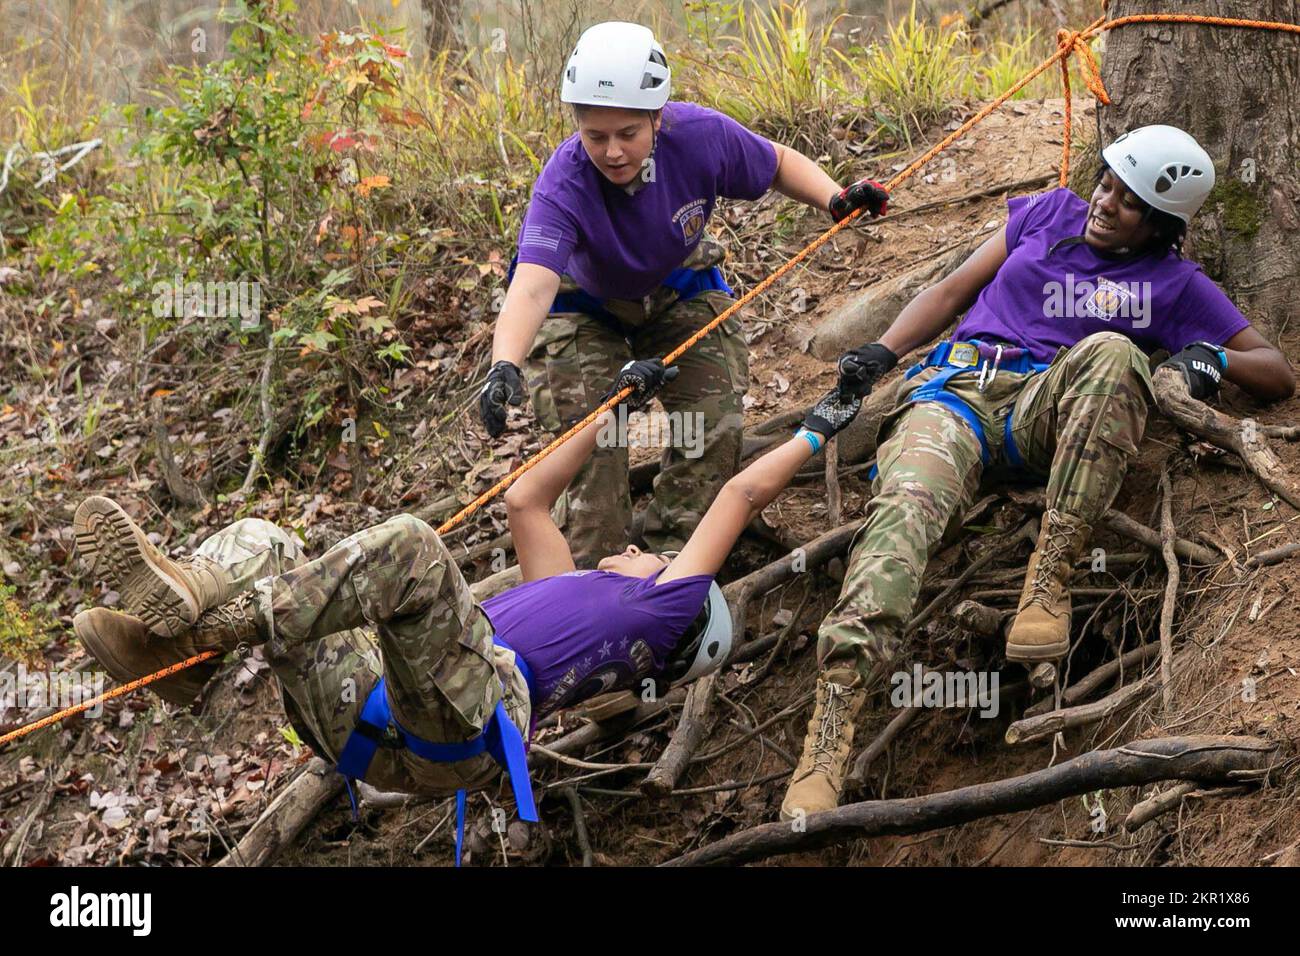 Cypress Lake High School's Army JROTC Raider team work together to get  their teammates across the water in the one-rope bridge event, one of the  five challenges Cadet Raider Teams had to